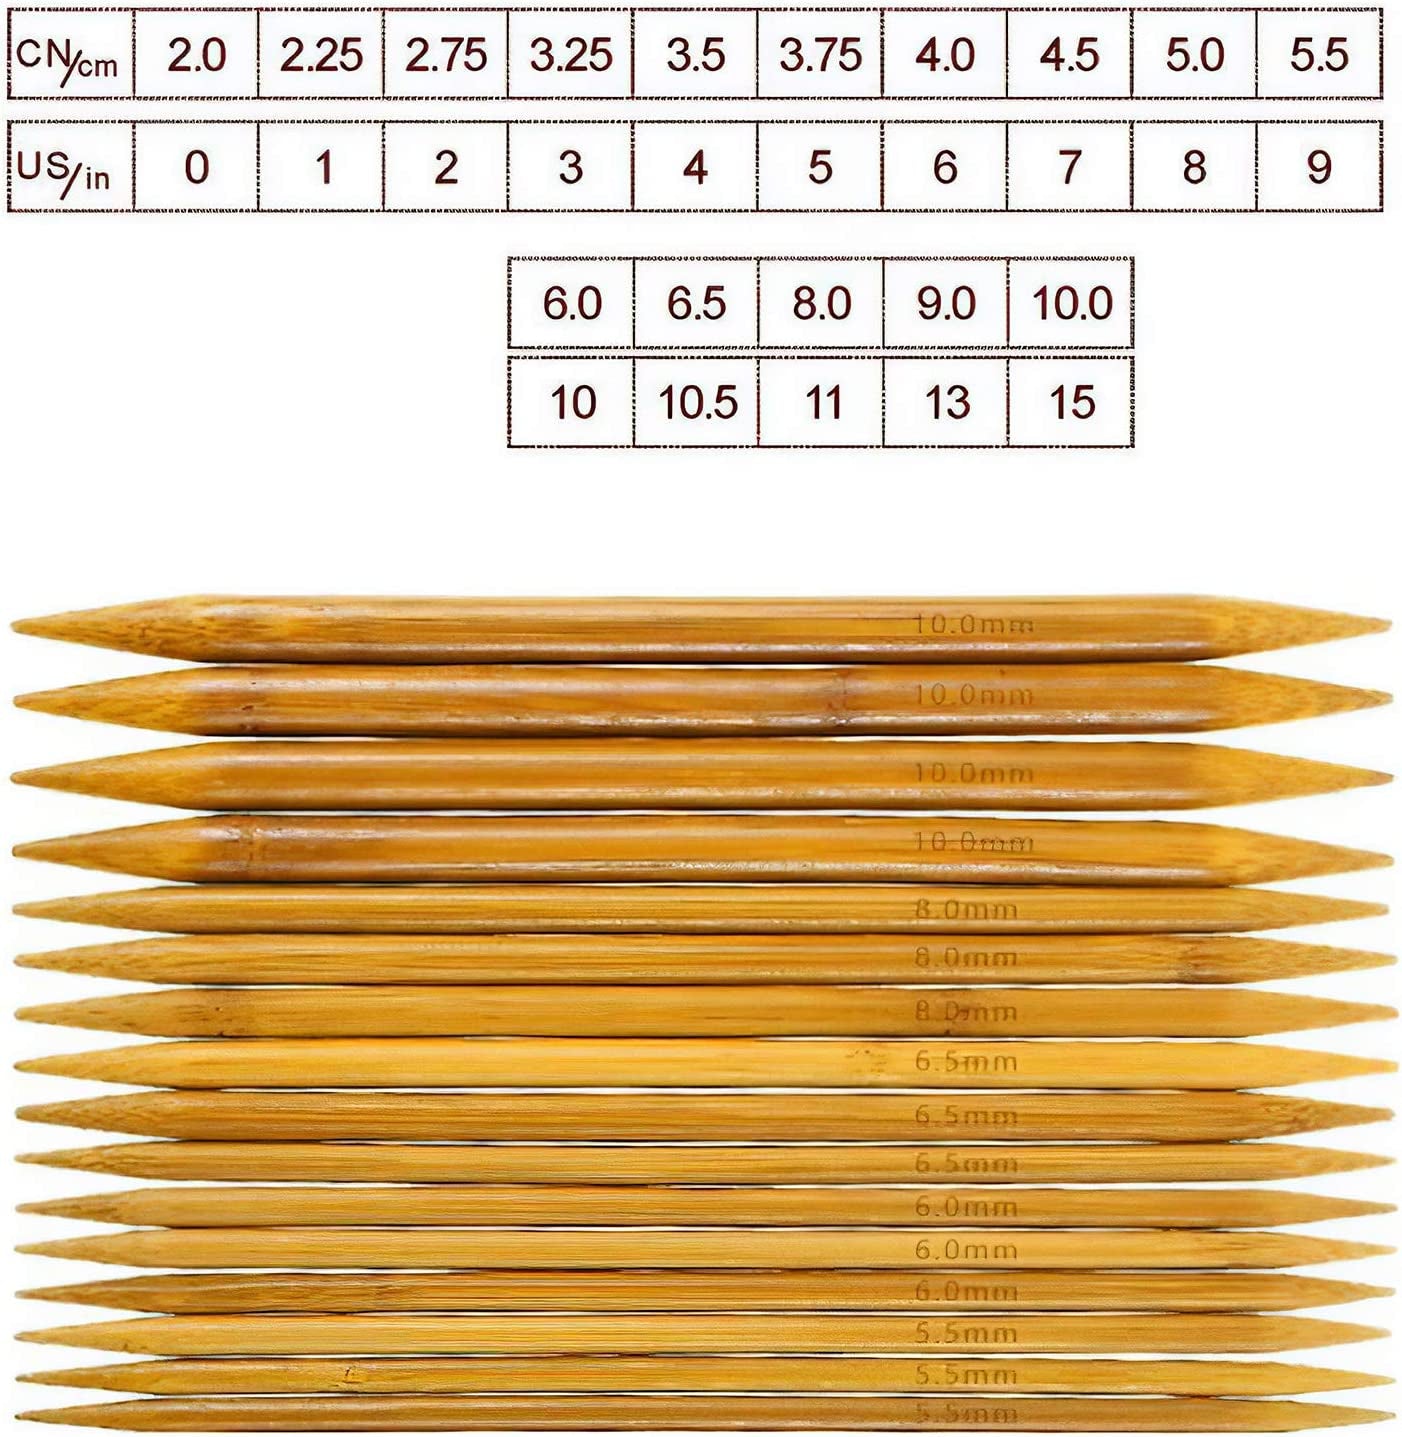 Double Pointed , 75 Pcs Bamboo Knitting Needles Set, 15 Sizes from 2.0Mm-10.0Mm(8 Inches Length)+ 4Pcs Knitting Needles Point Protectors